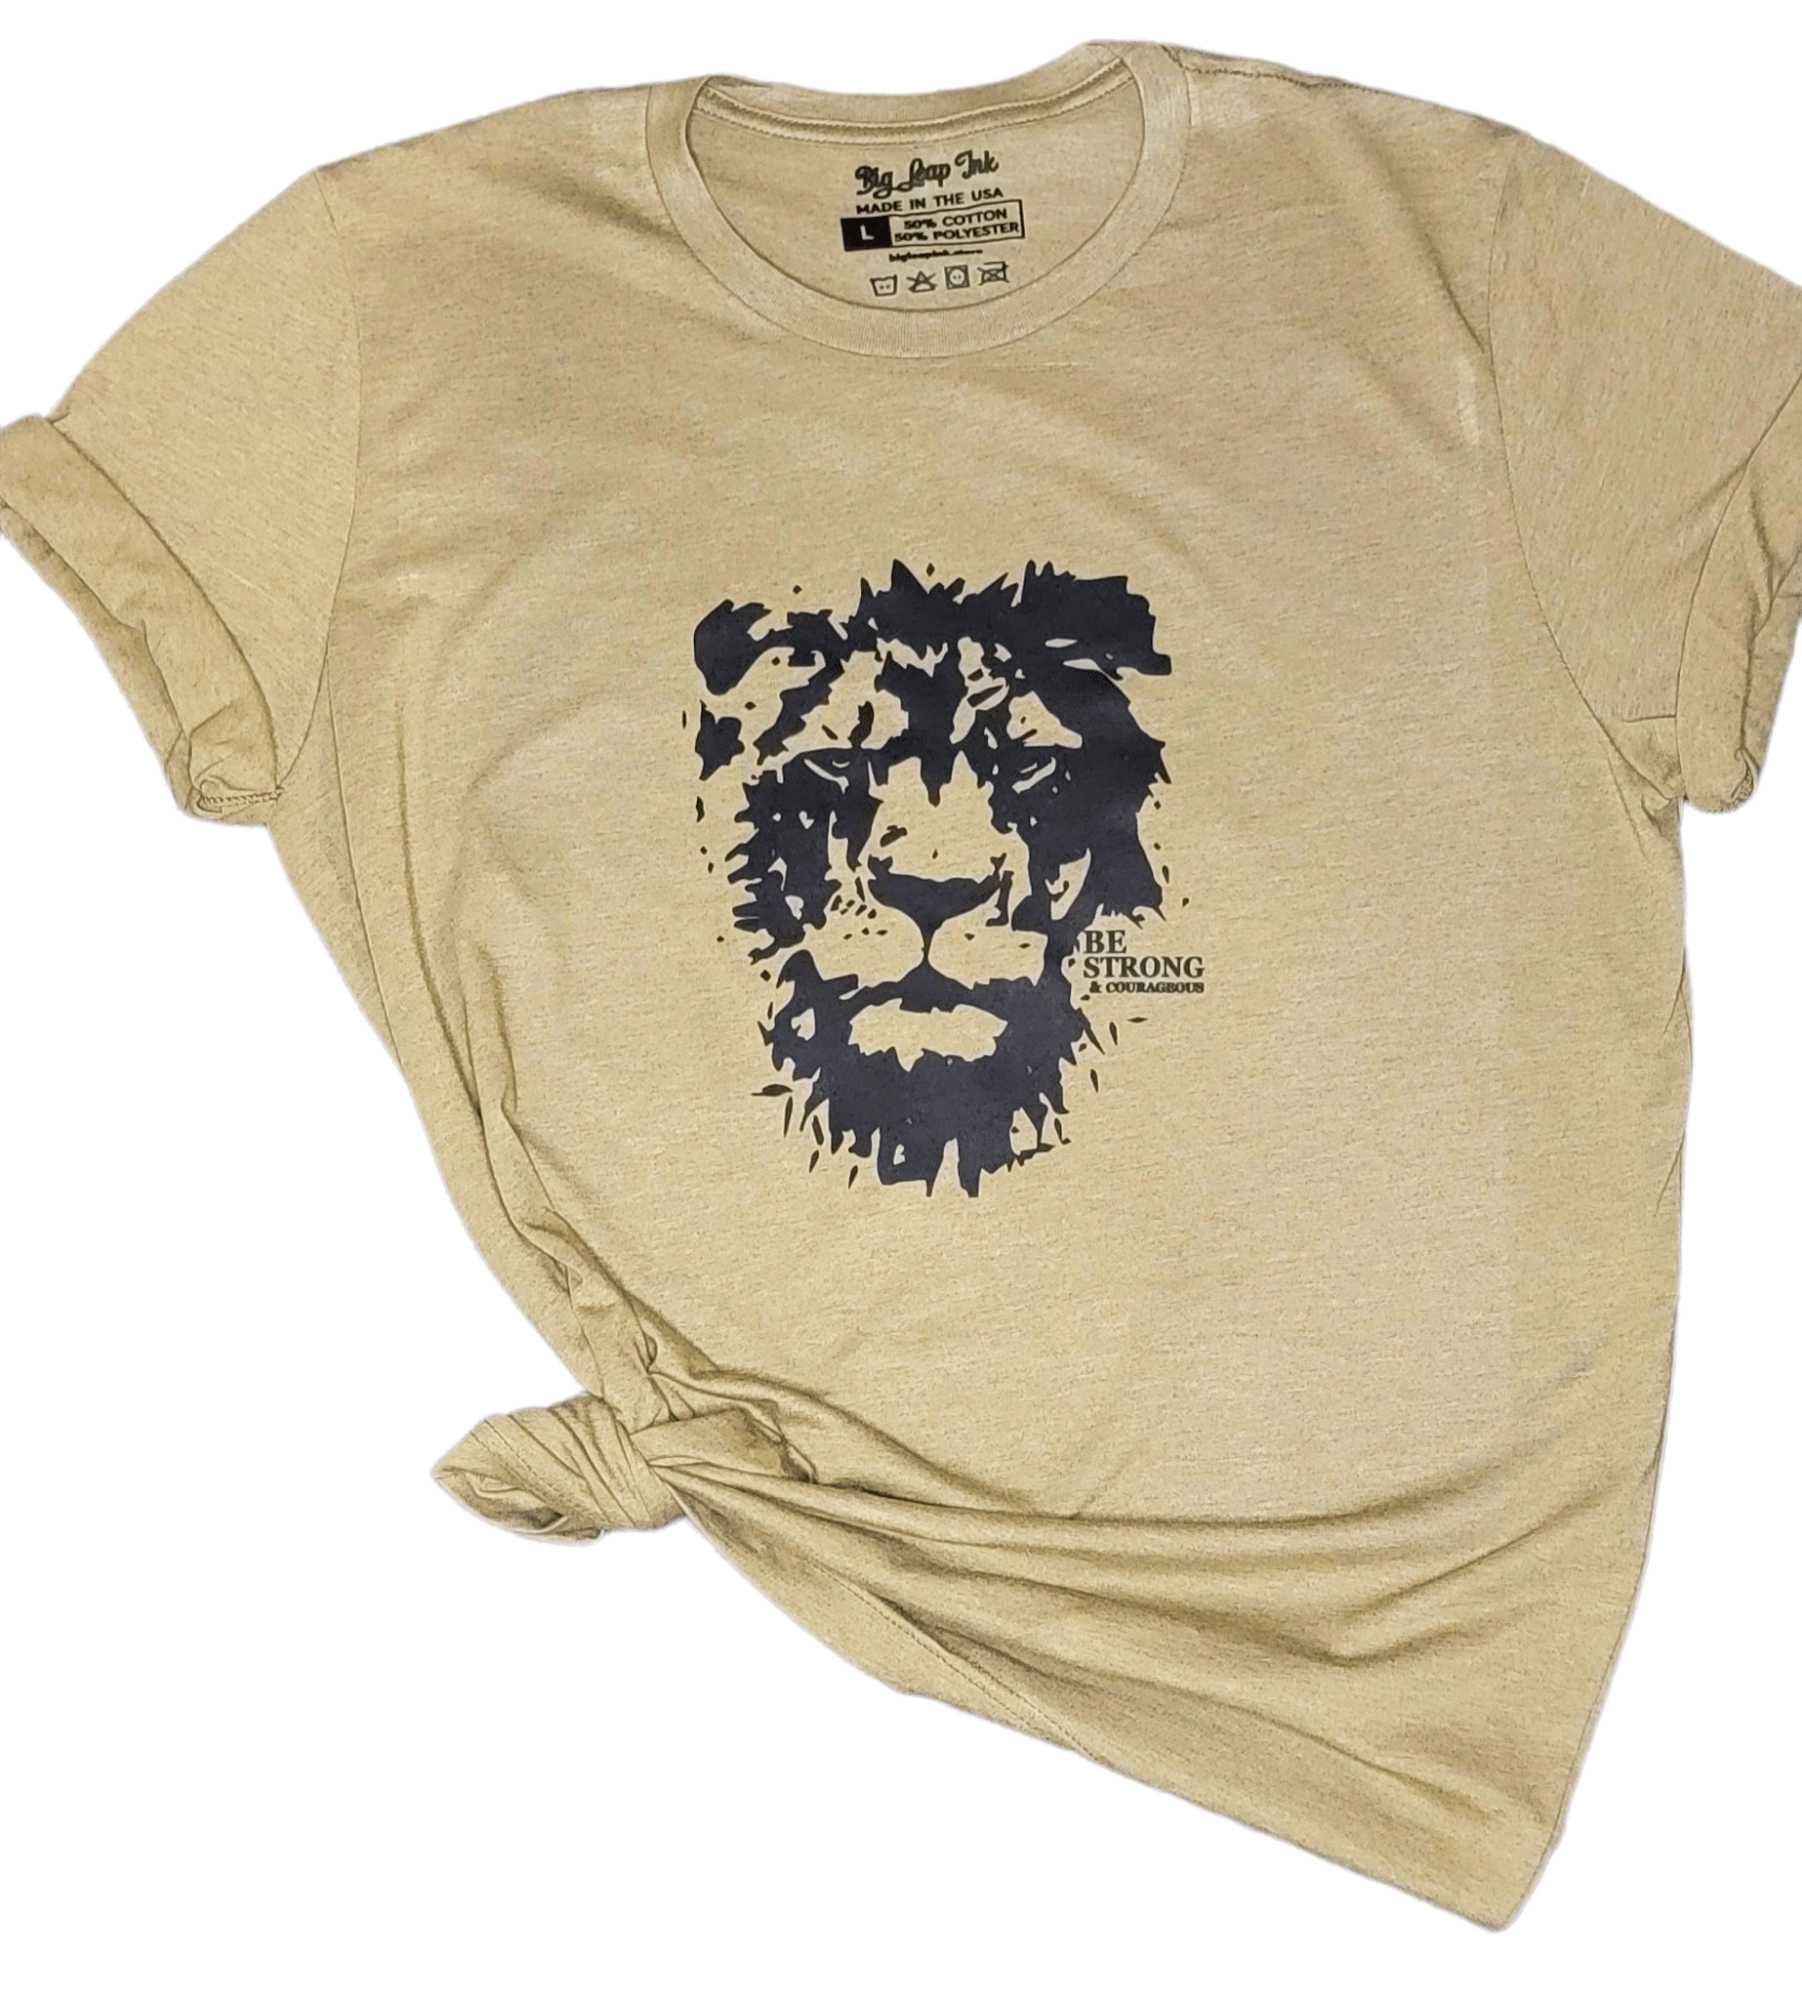 Be Strong & Courageous Lion Heathered Unisex Shirt Big Leap Ink Shirts & Tops 26.99 Big Leap Ink 3XLHeatherOlive